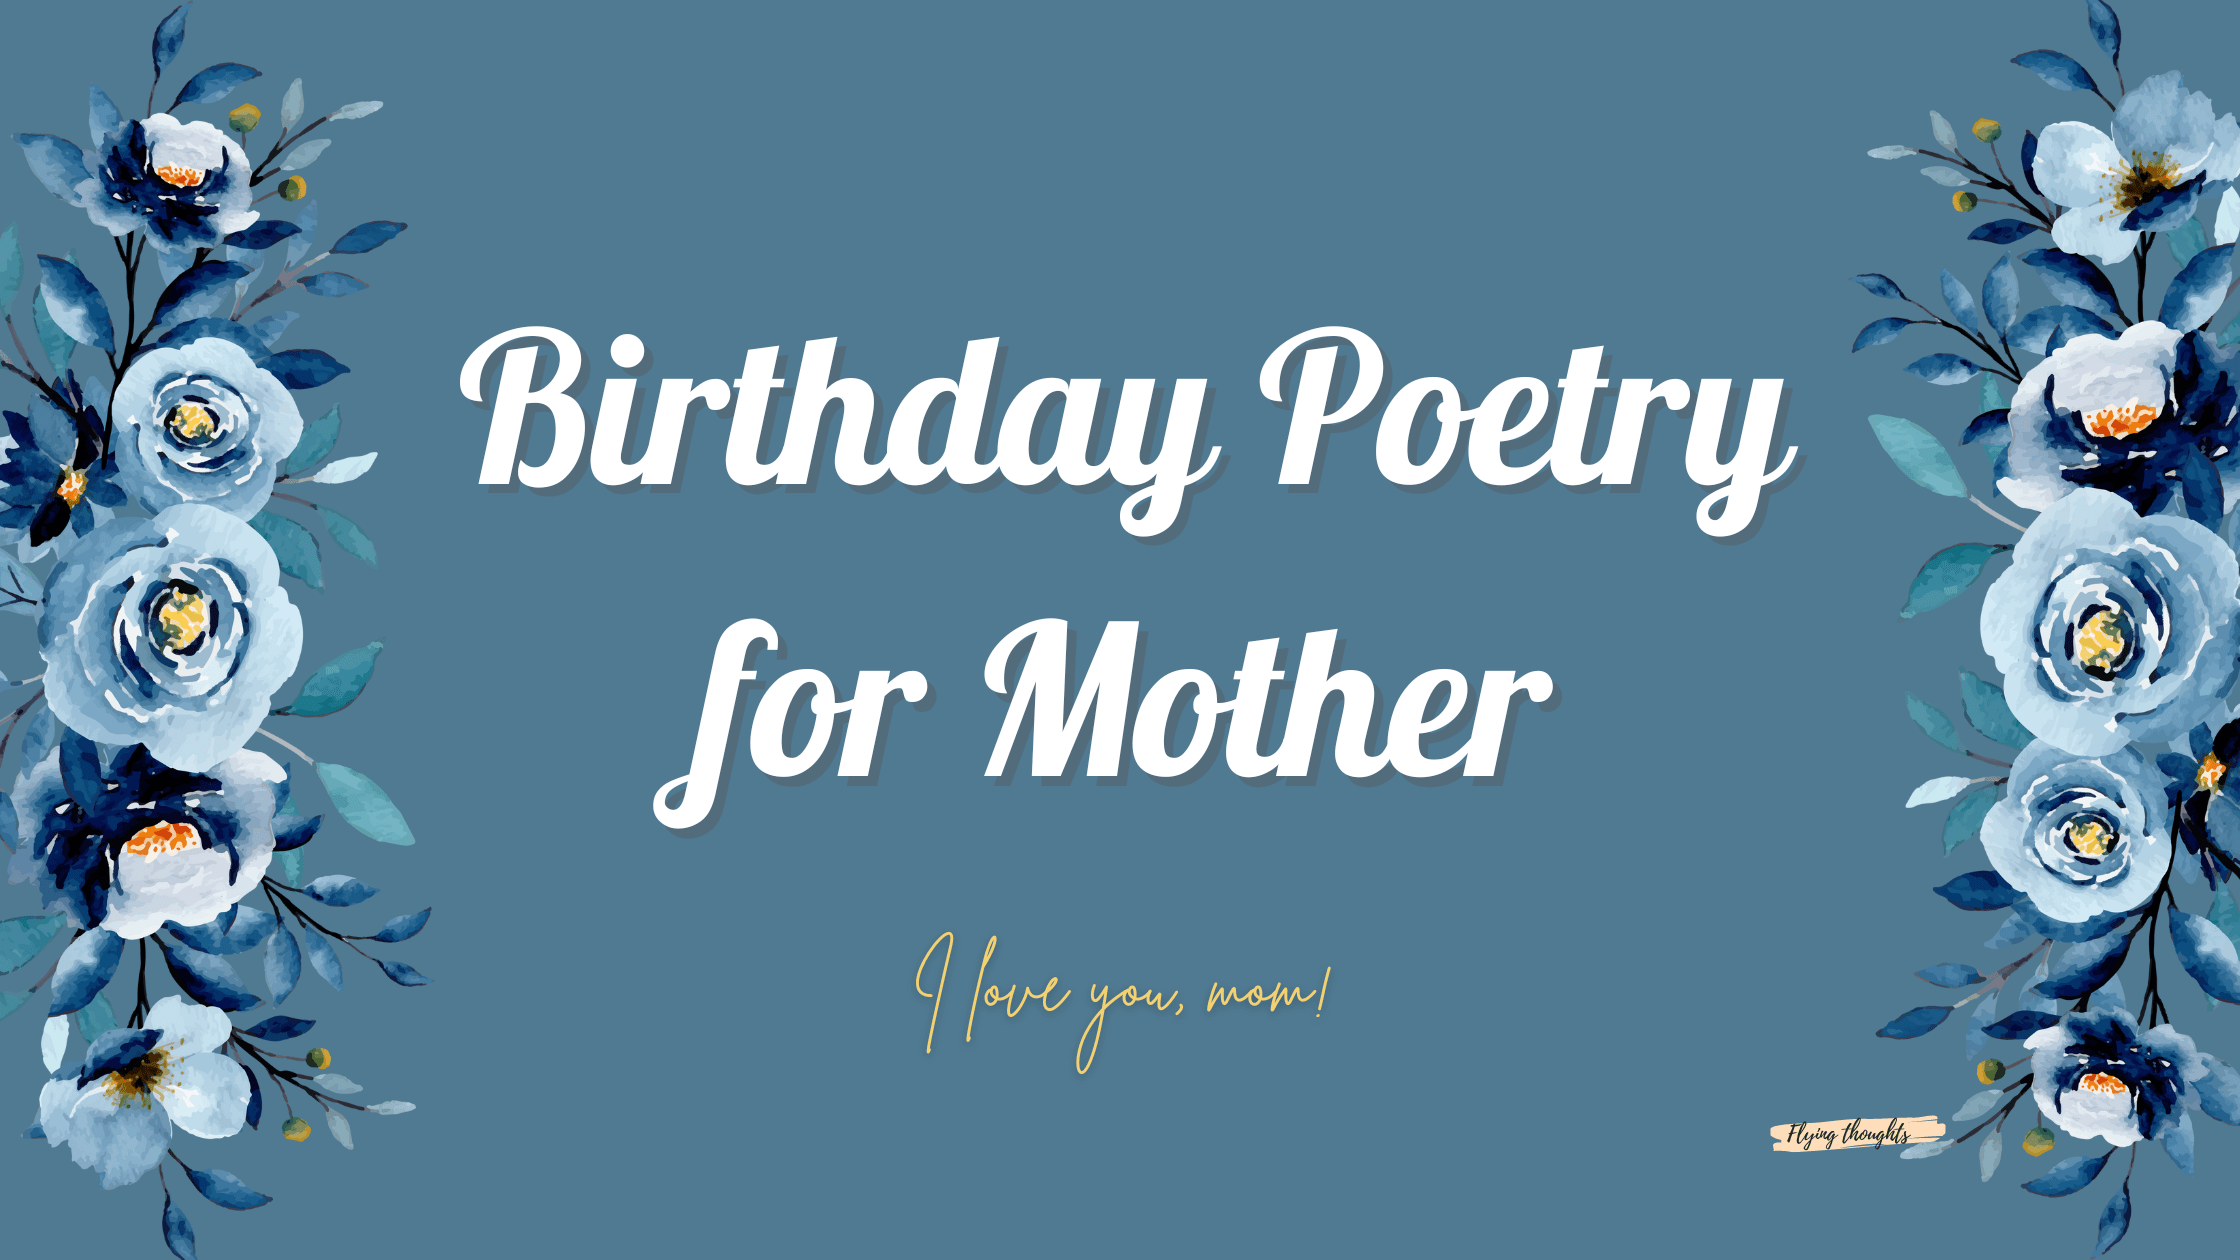 Birthday Poetry for Mother that Speaks Volumes